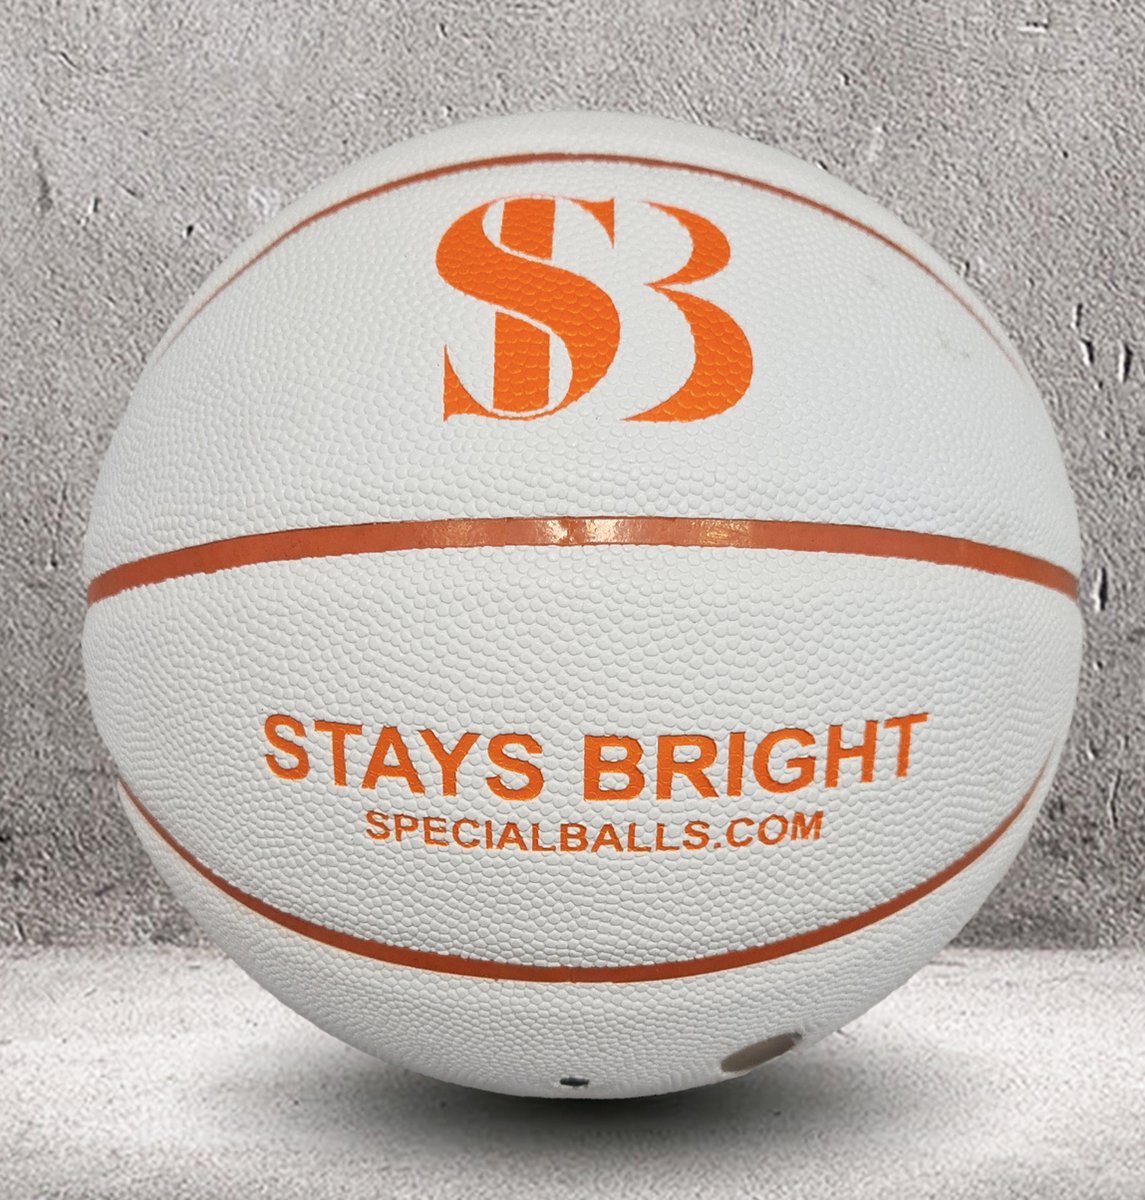 Special Balls - Stays Bright Deluxe WHITE - LED - basketbal - indoor & outdoor